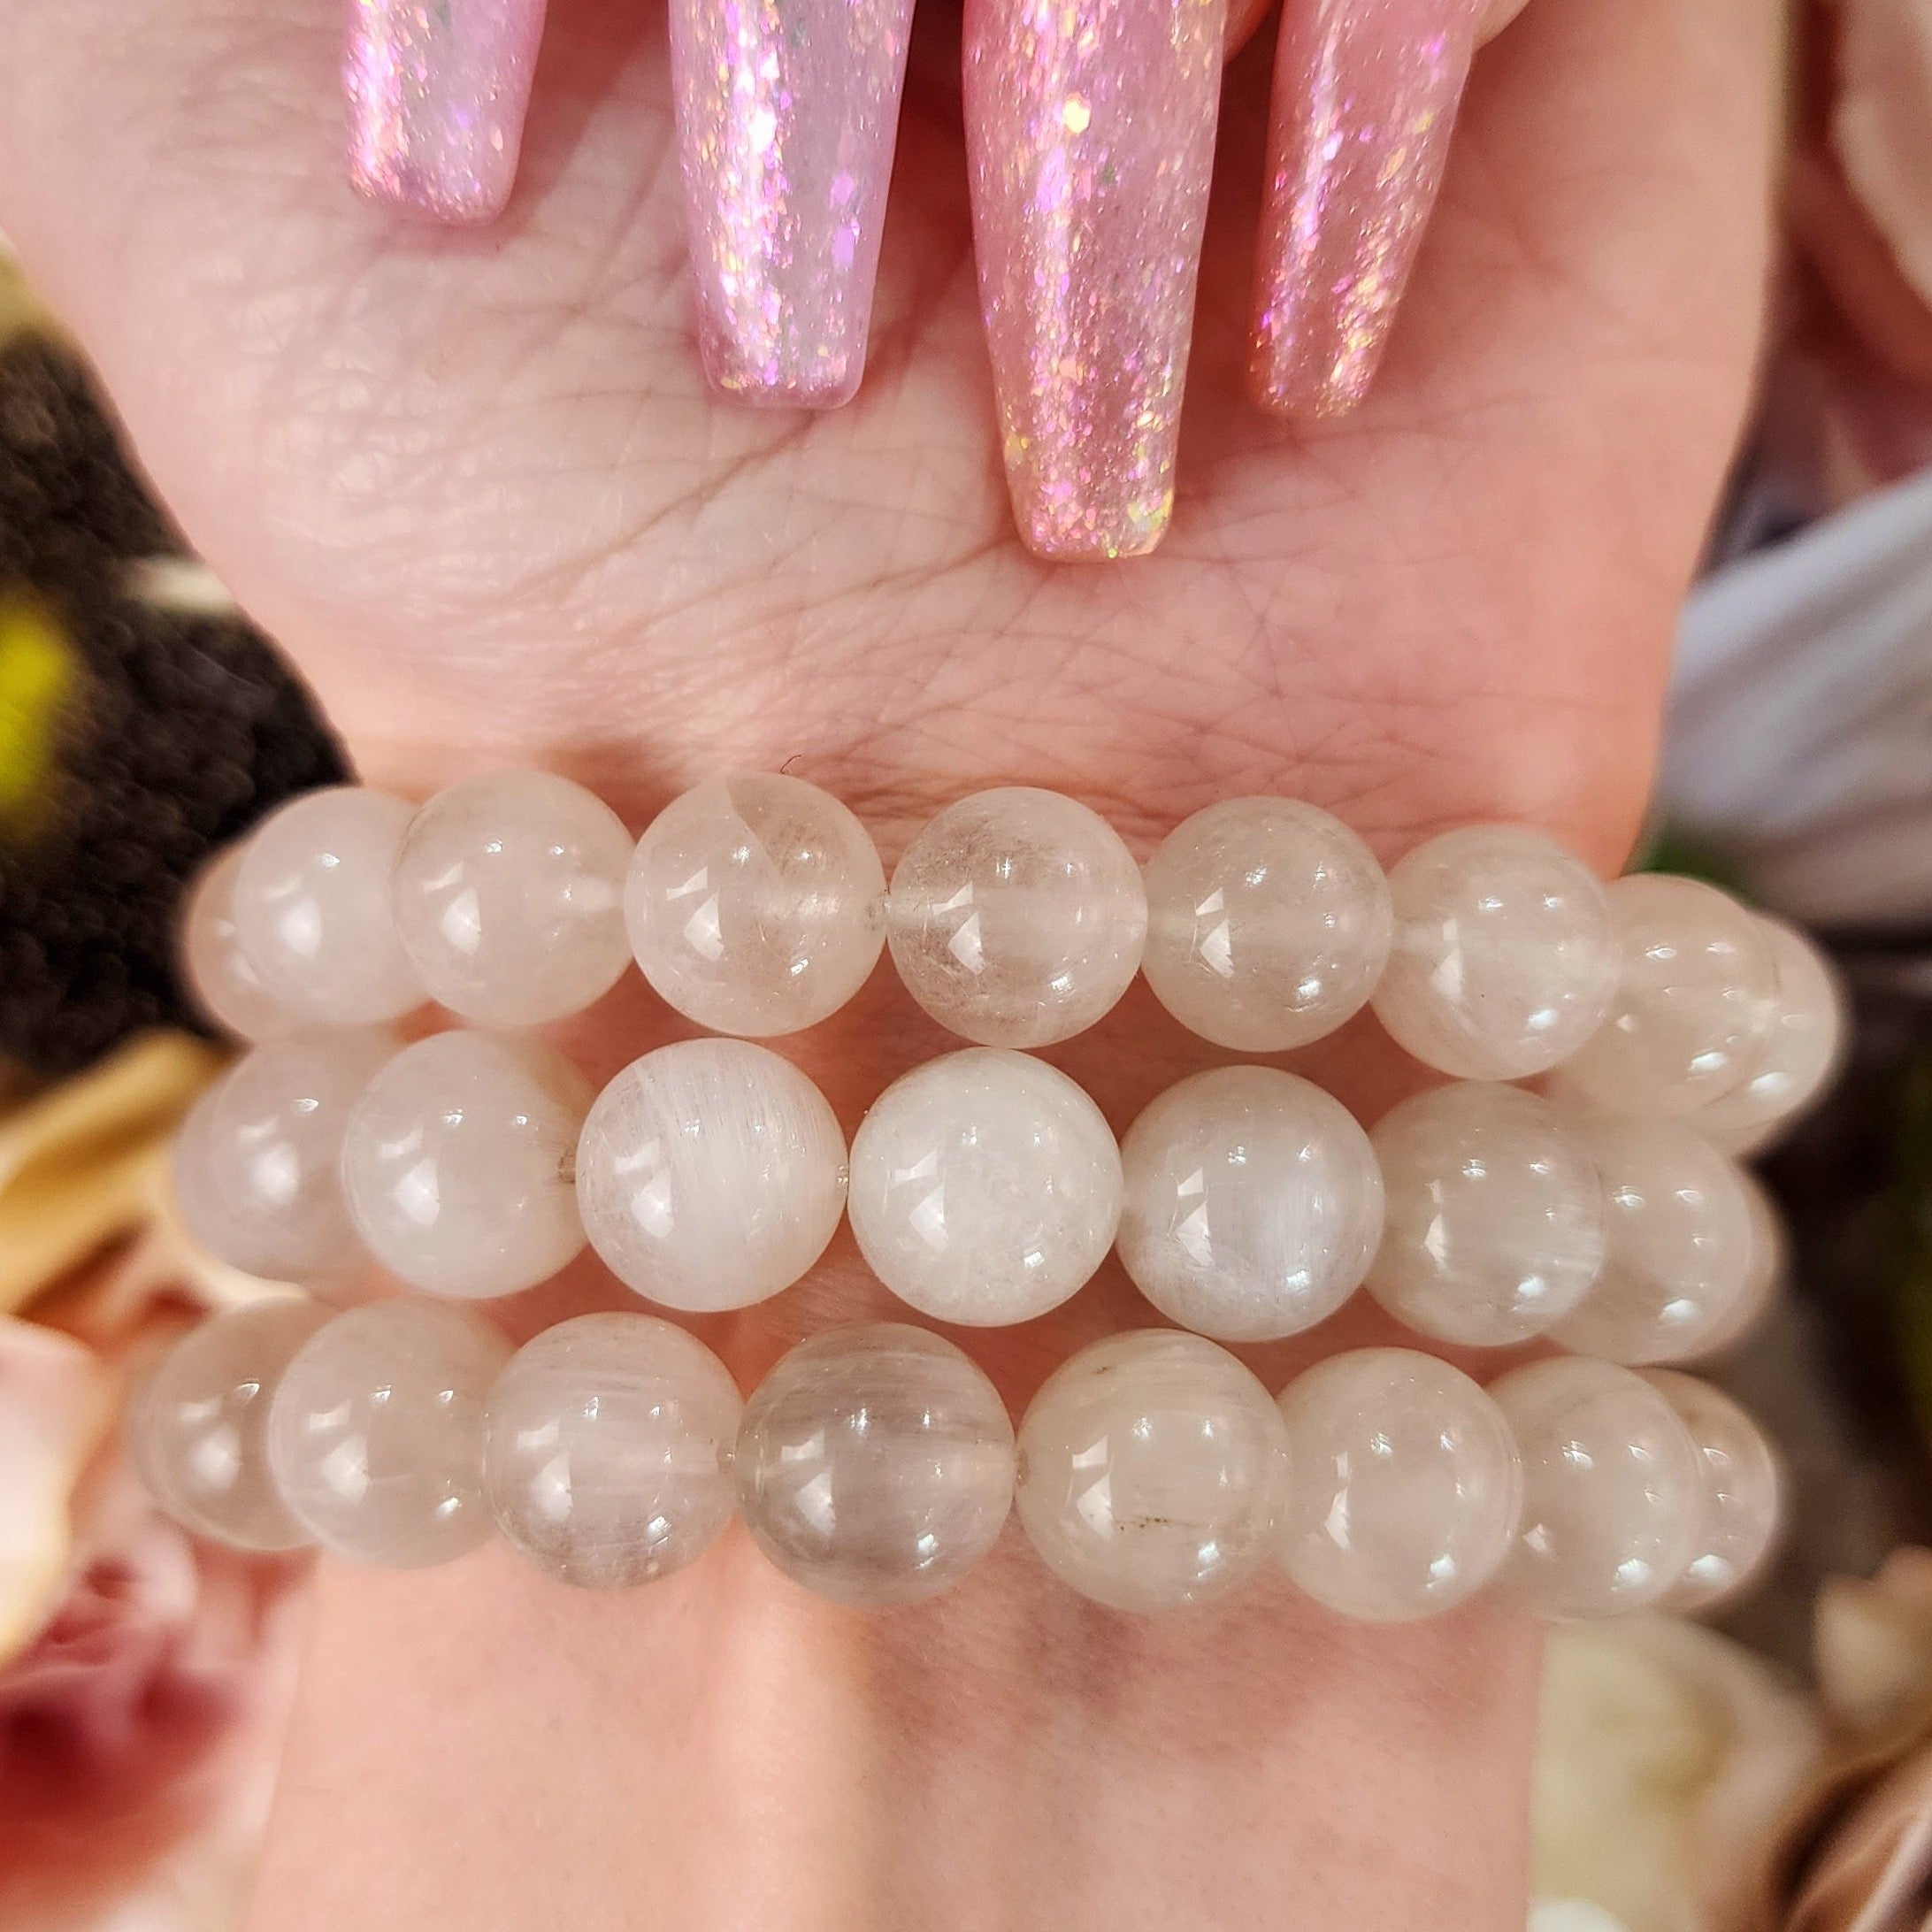 Icey White Rutile in Quartz Bracelet (AAA Grade) for Awakening your Spiritual Gifts, Connection with Angels and Ancestors